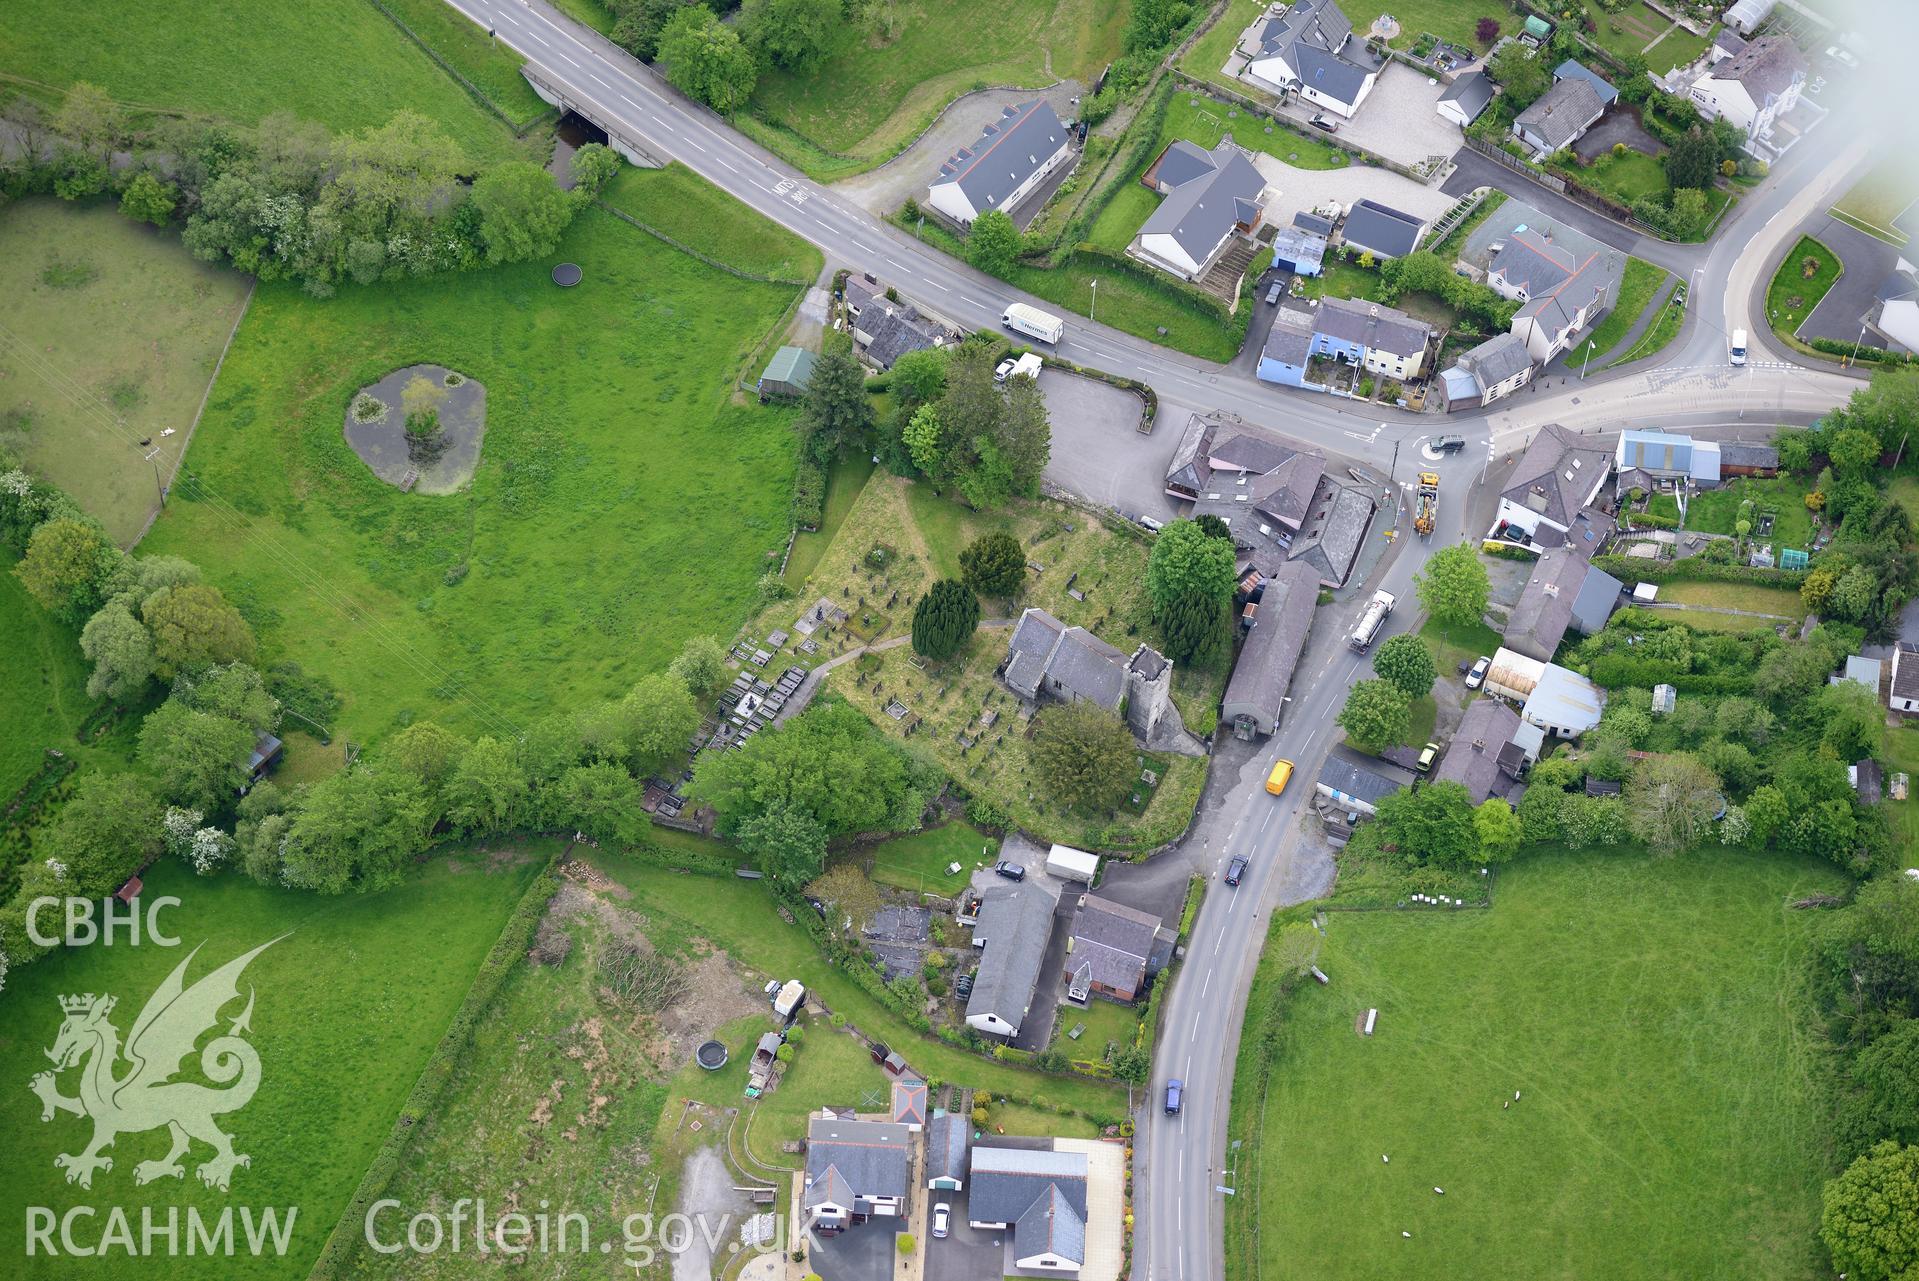 St. Gwynin's Church and Llanwnnen Village. Oblique aerial photograph taken during the Royal Commission's programme of archaeological aerial reconnaissance by Toby Driver on 3rd June 2015.